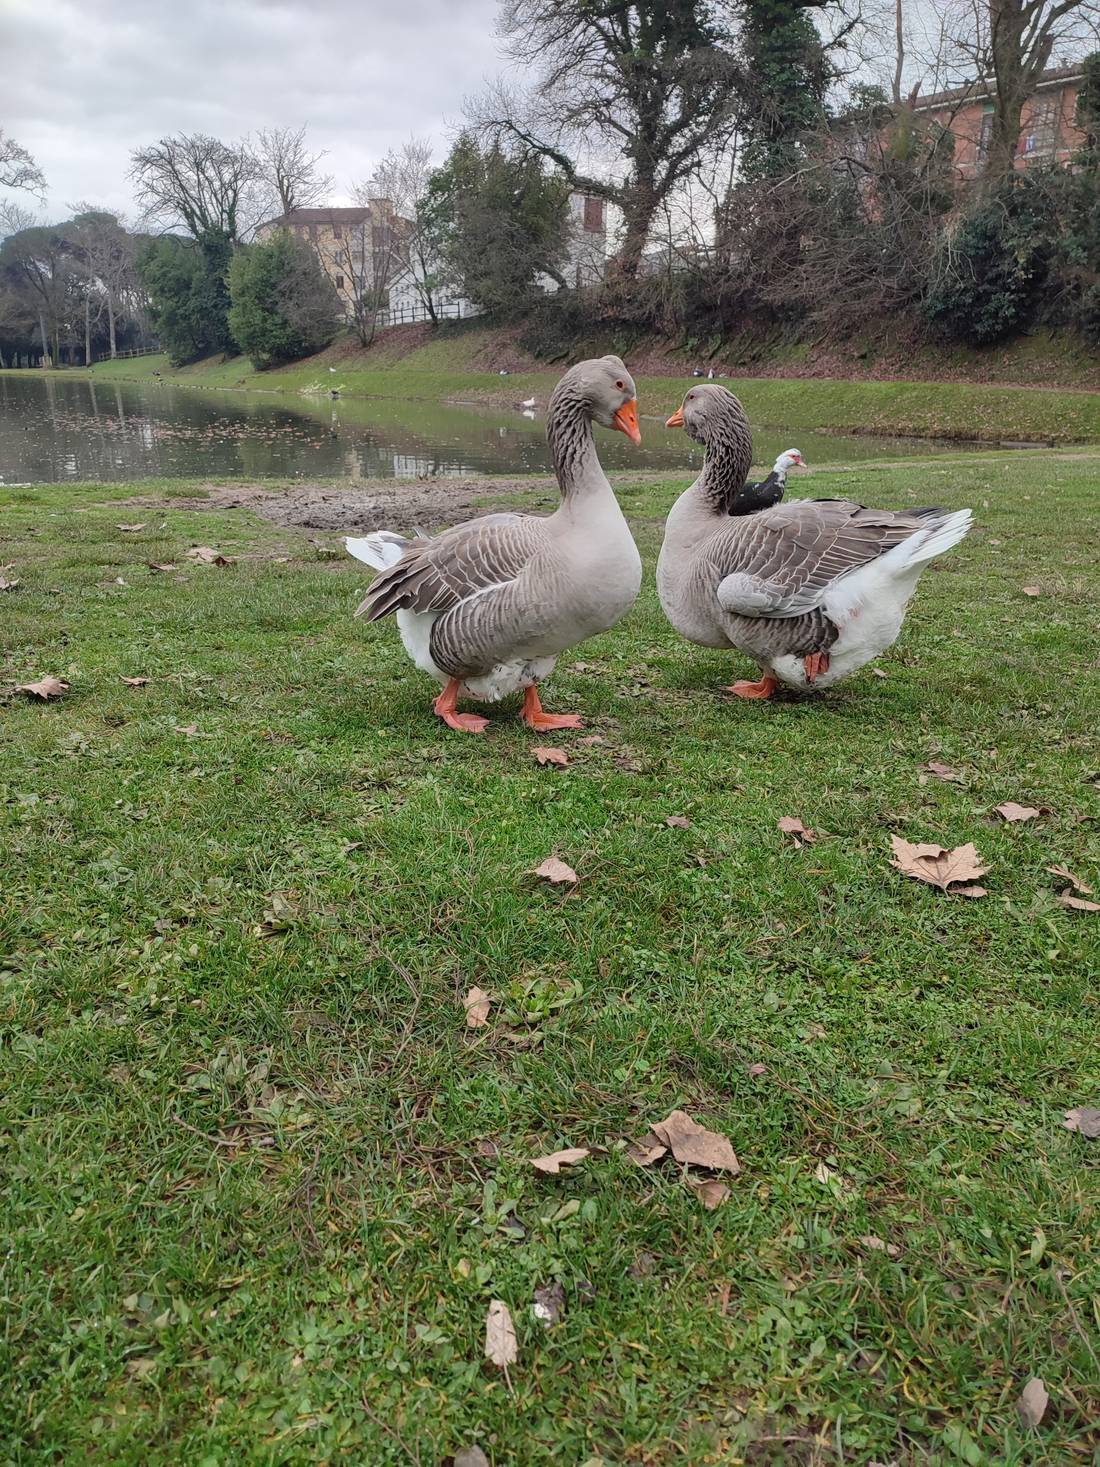 These ducks are so beautiful n the park the animals are well treated and feeded daily.